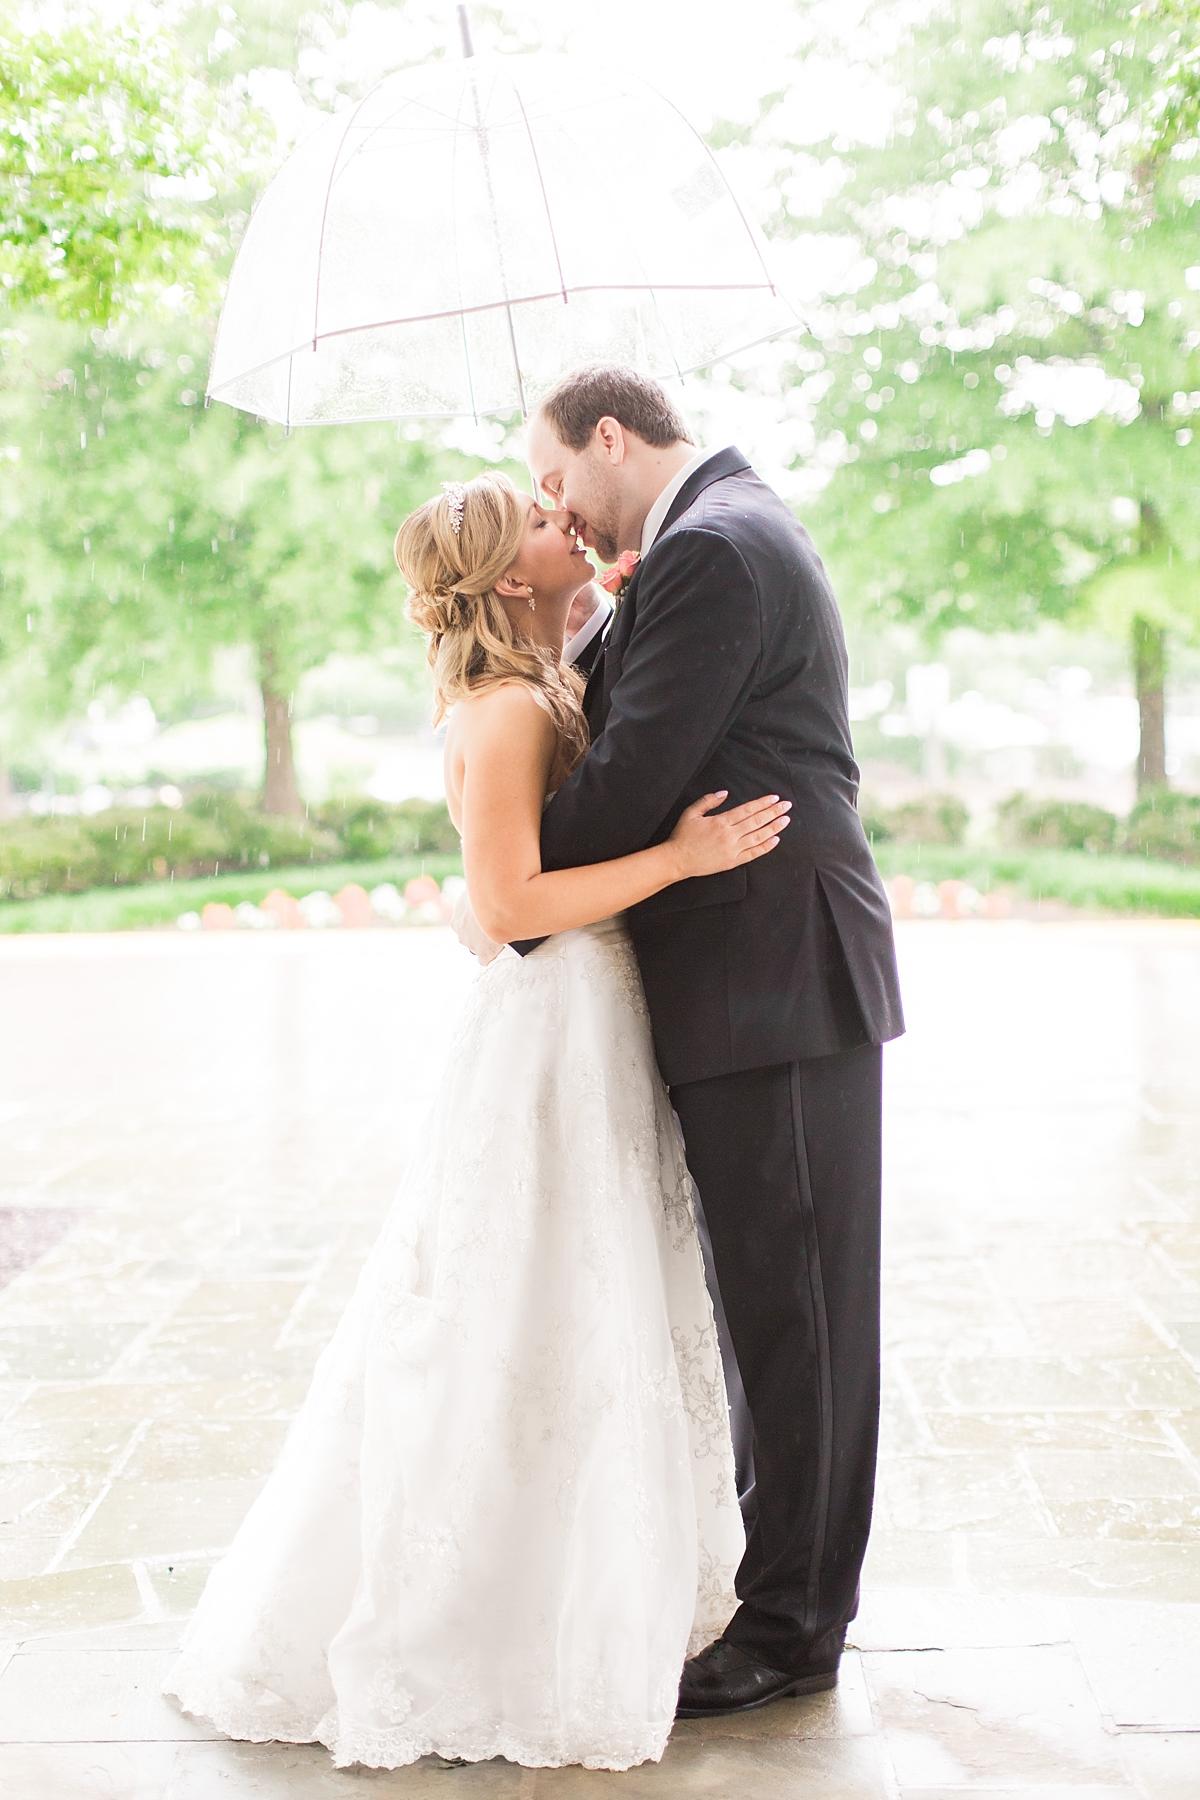 Rain is always a possibility; Washington, DC wedding photographer shares a few tips on how to prepare and what to do if it does rain on your wedding day!